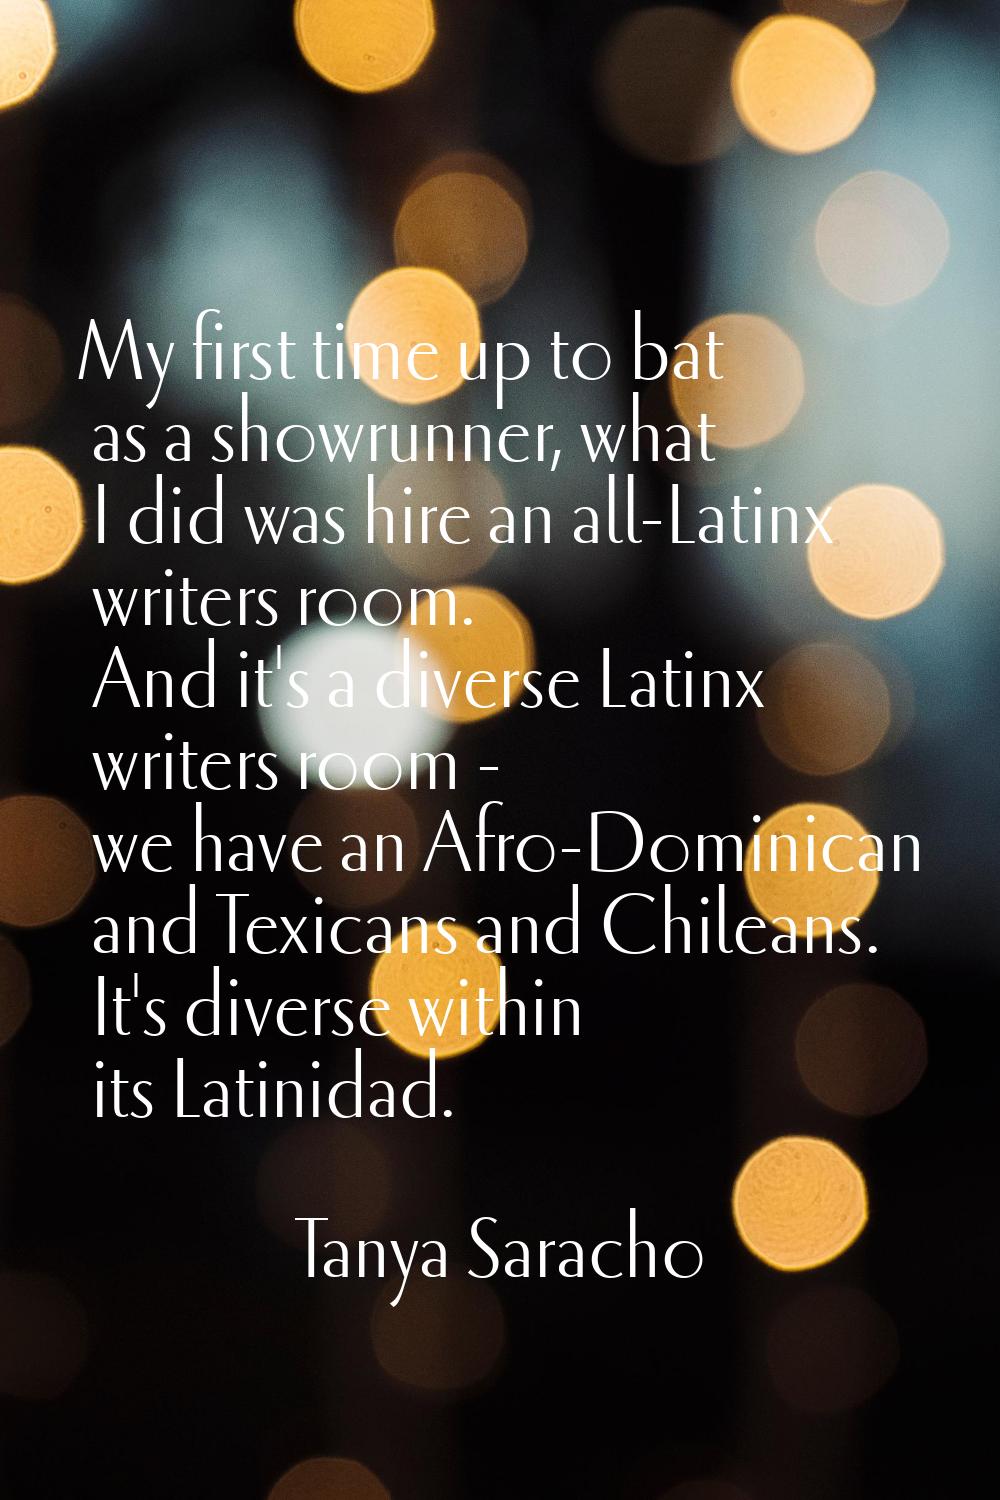 My first time up to bat as a showrunner, what I did was hire an all-Latinx writers room. And it's a